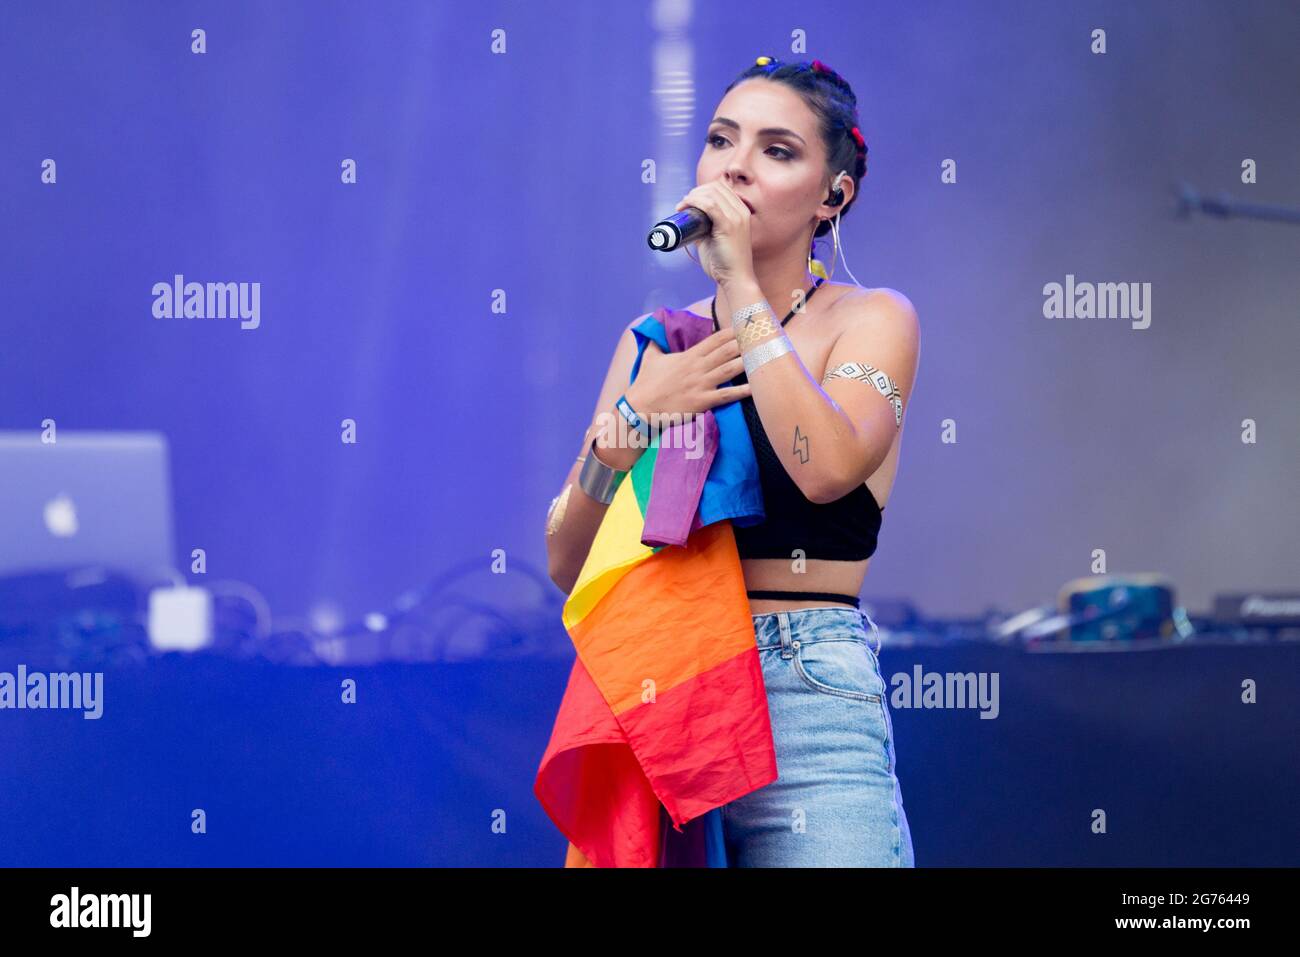 Valencia, Spain. 10th July, 2021. Elena Farga performs on stage during the Big Sound Festival. Elena Farga is a Valencian singer who is a finalist for the television program X Factor in its 2018 Spanish edition. First edition of the urban music festival Big Sound Festival in Estadi Ciutat de Valencia in Valencia. Credit: SOPA Images Limited/Alamy Live News Stock Photo